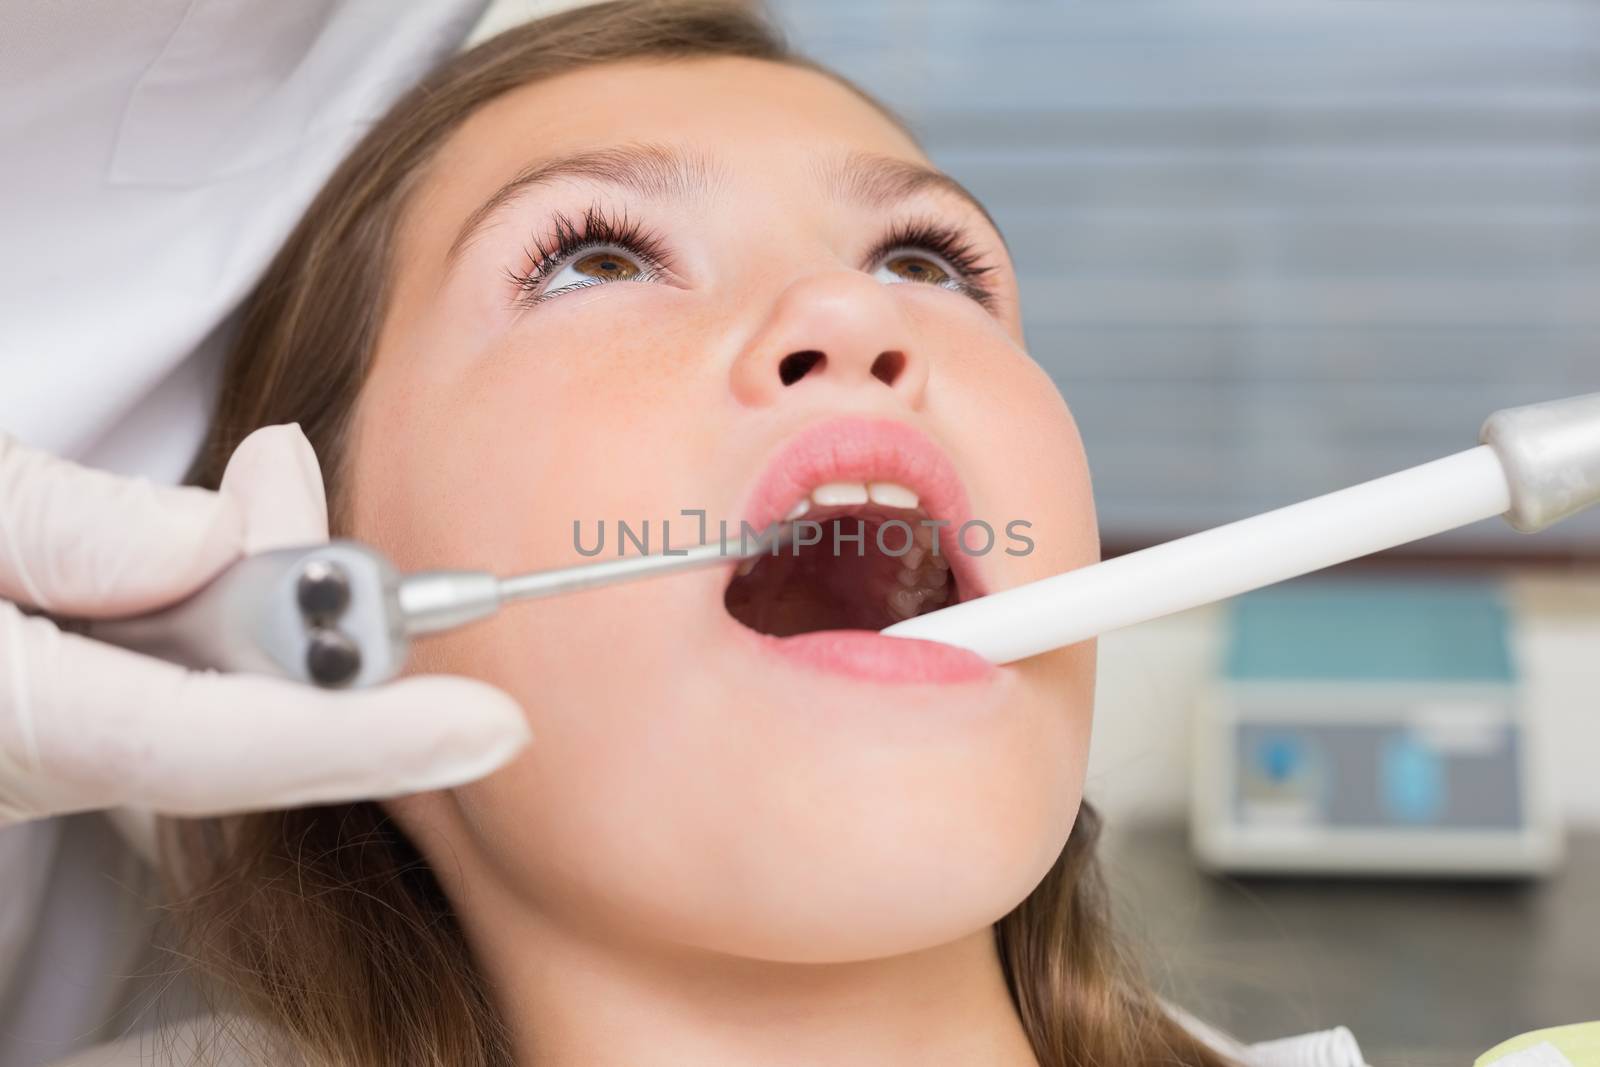 Pediatric dentist examining a patients teeth in the dentists chair by Wavebreakmedia